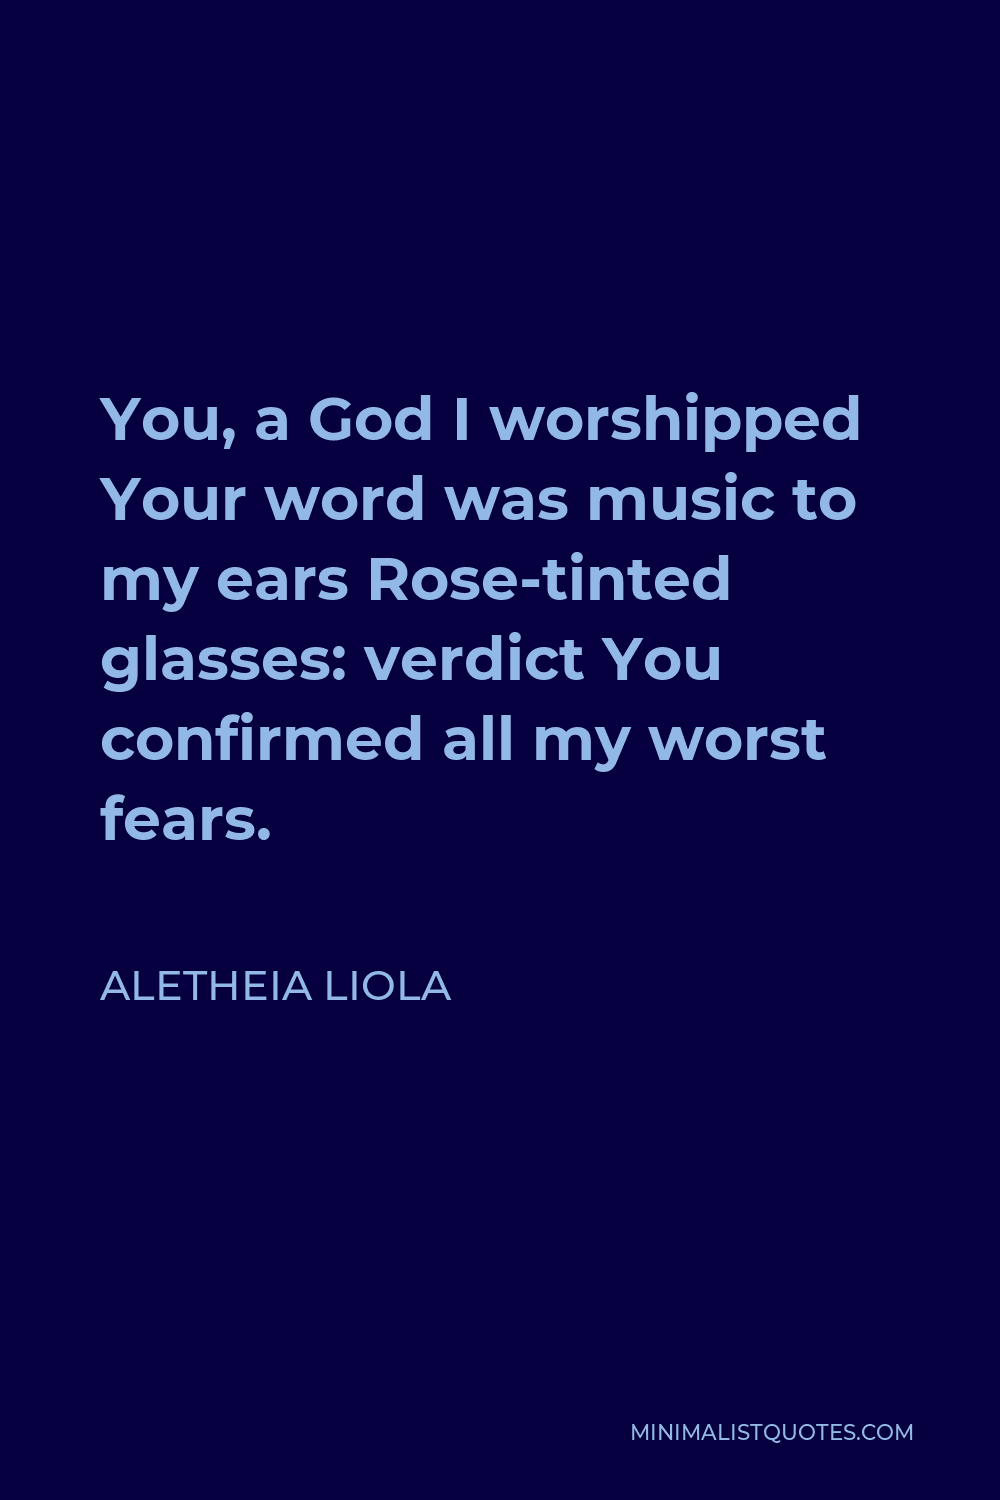 Aletheia Liola Quote - You, a God I worshipped Your word was music to my ears Rose-tinted glasses: verdict You confirmed all my worst fears.